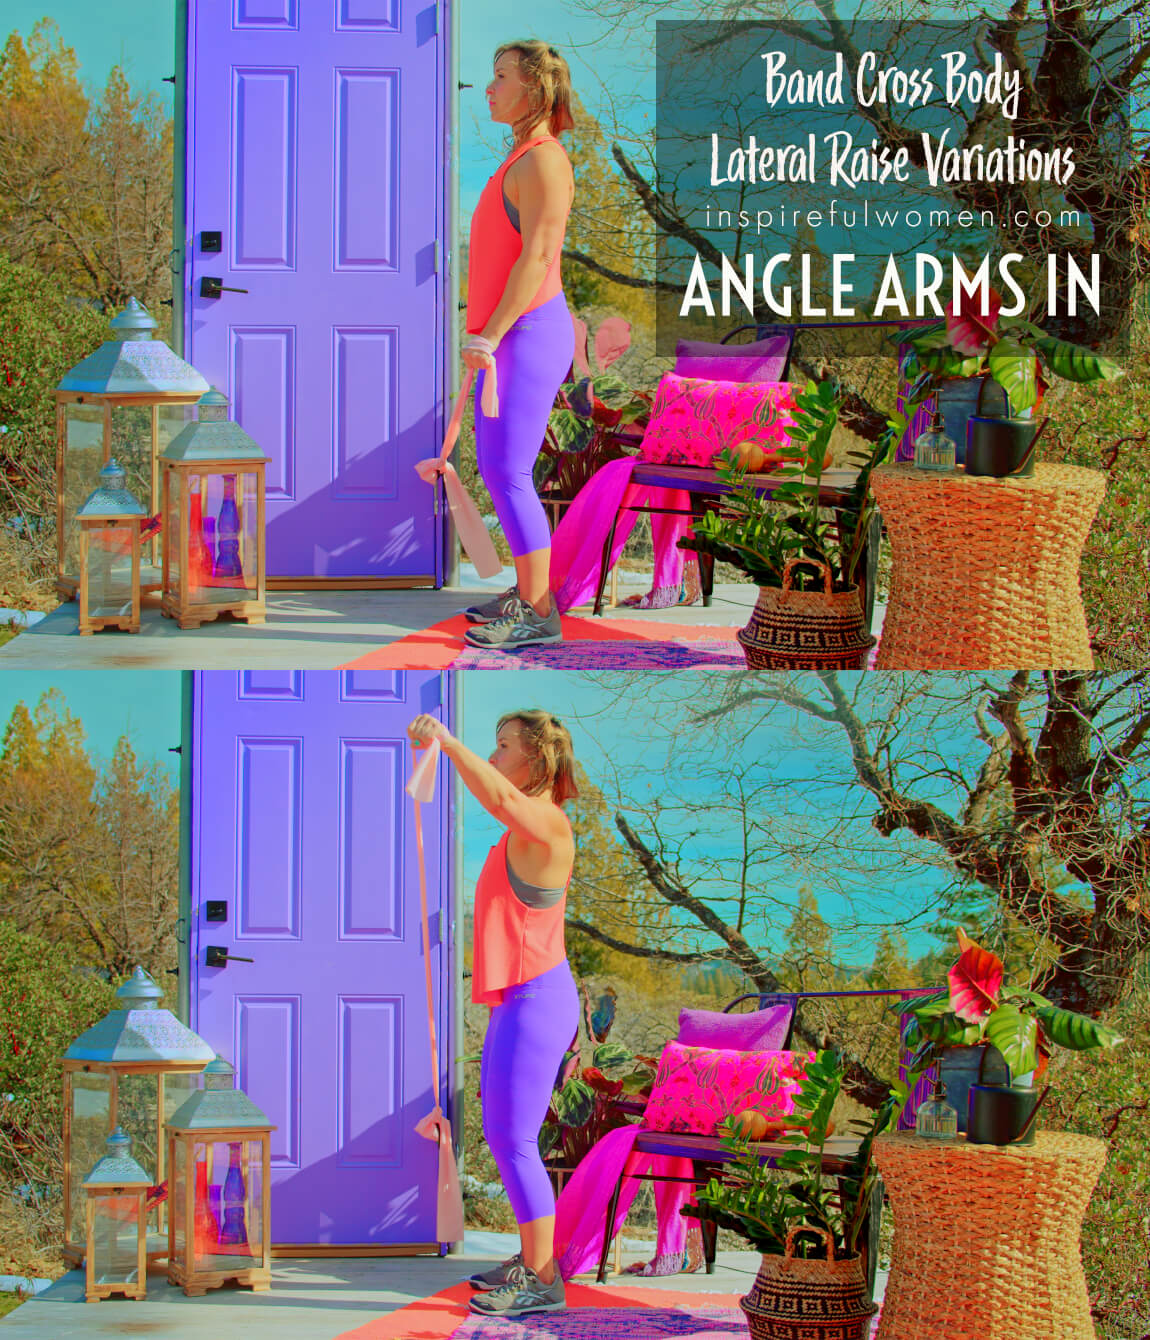 angle-arms-in-band-cross-body-lateral-raise-variation